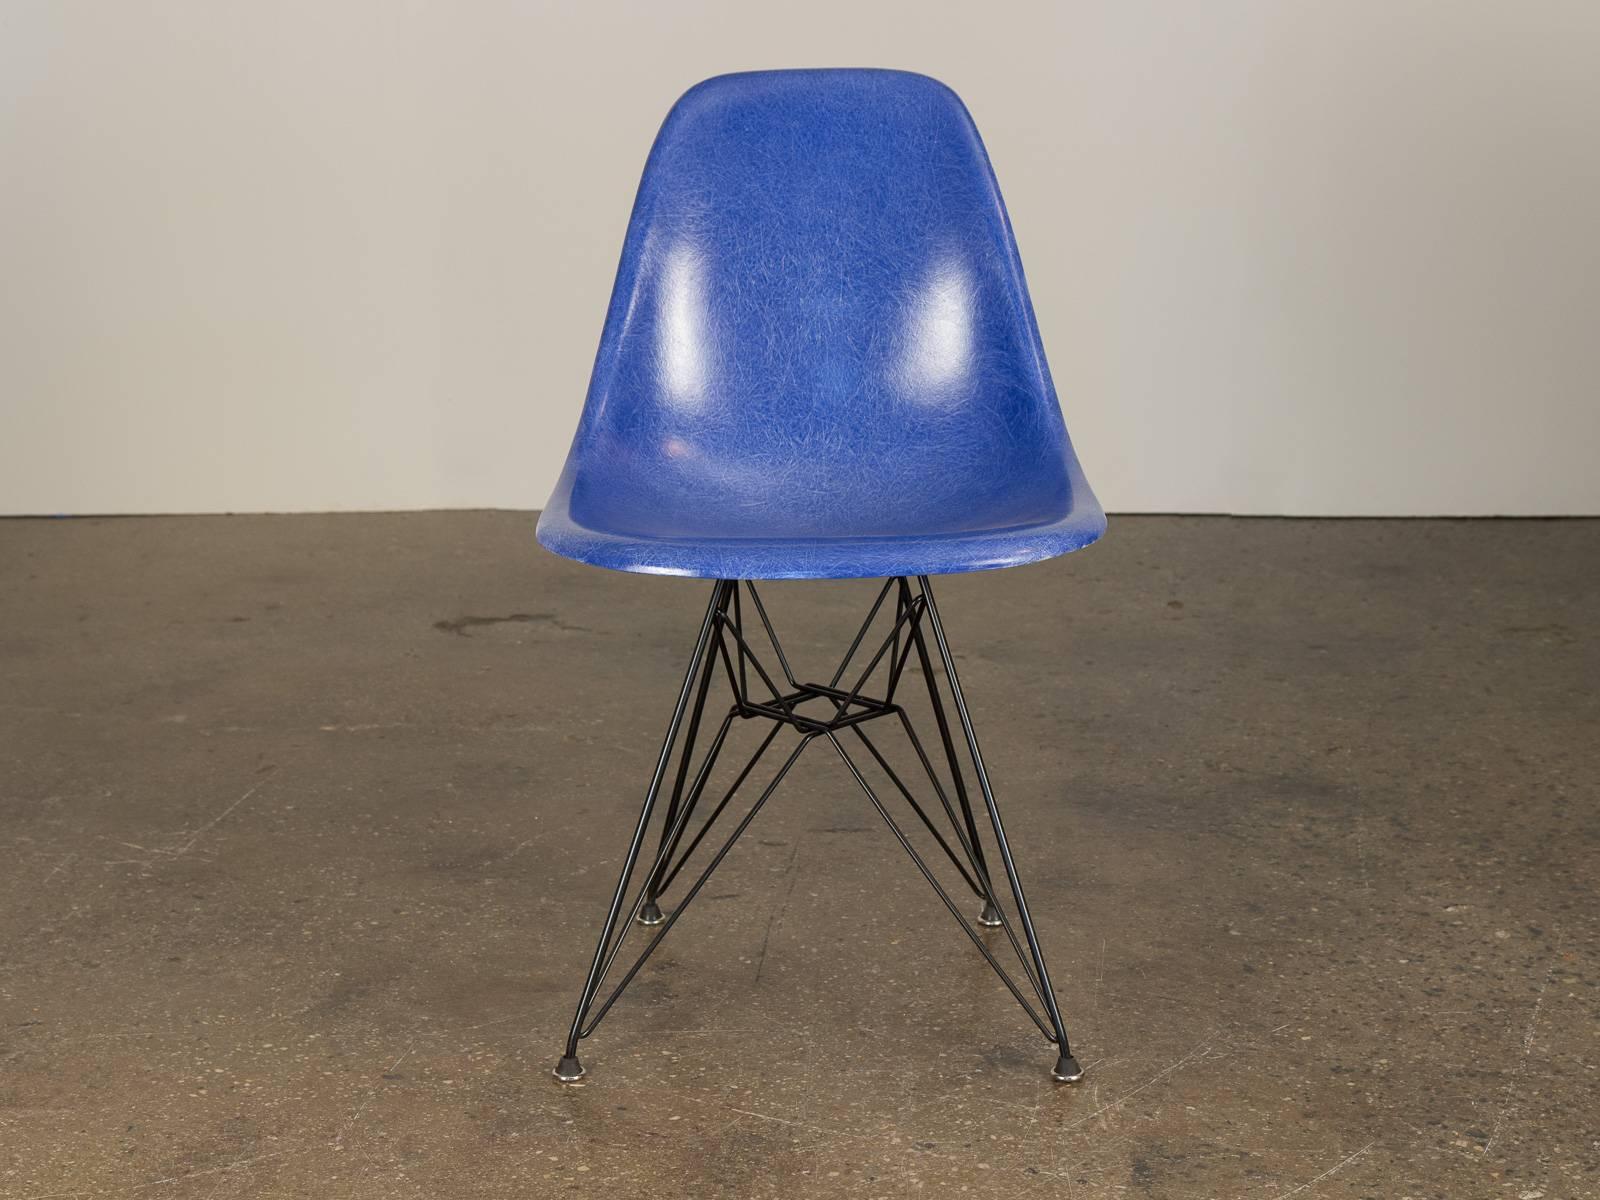 Original 1960s molded fiberglass shell chairs in Ultramarine Blue, designed by Charles and Ray Eames for Herman Miller. Gleaming shells are in original condition, each with a distinct thready texture.  Shown here mounted on new black Eiffel base,